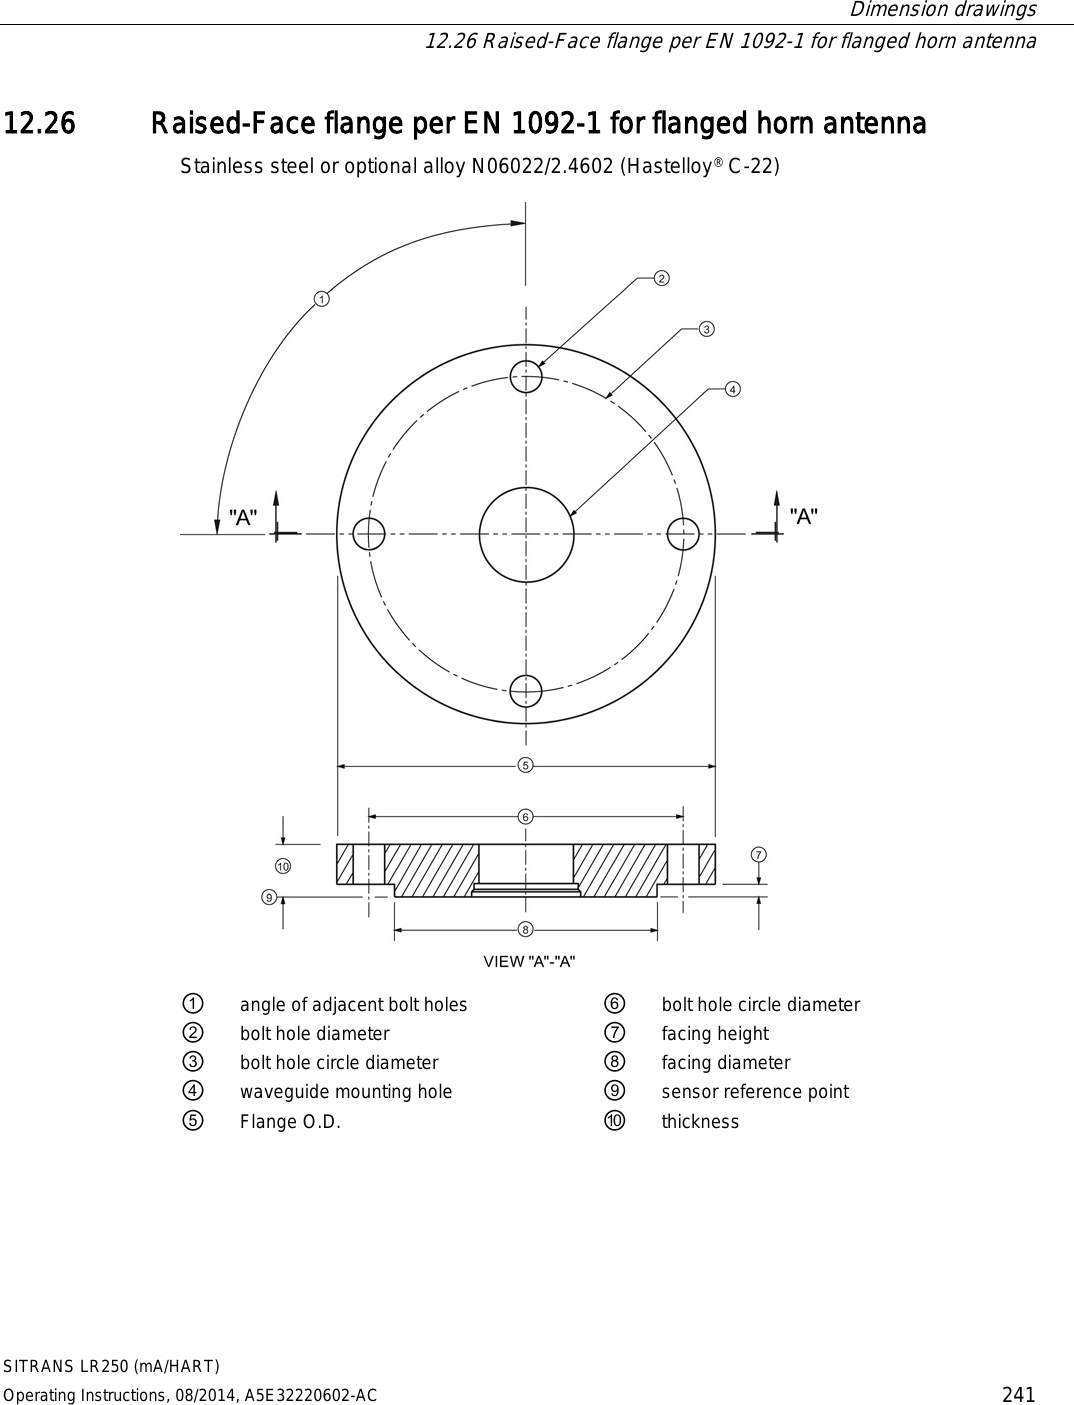  Dimension drawings  12.26 Raised-Face flange per EN 1092-1 for flanged horn antenna SITRANS LR250 (mA/HART) Operating Instructions, 08/2014, A5E32220602-AC 241 12.26 Raised-Face flange per EN 1092-1 for flanged horn antenna Stainless steel or optional alloy N06022/2.4602 (Hastelloy® C-22)  ① angle of adjacent bolt holes ⑥ bolt hole circle diameter ② bolt hole diameter ⑦ facing height ③ bolt hole circle diameter ⑧ facing diameter ④ waveguide mounting hole ⑨ sensor reference point ⑤ Flange O.D. ⑩ thickness 